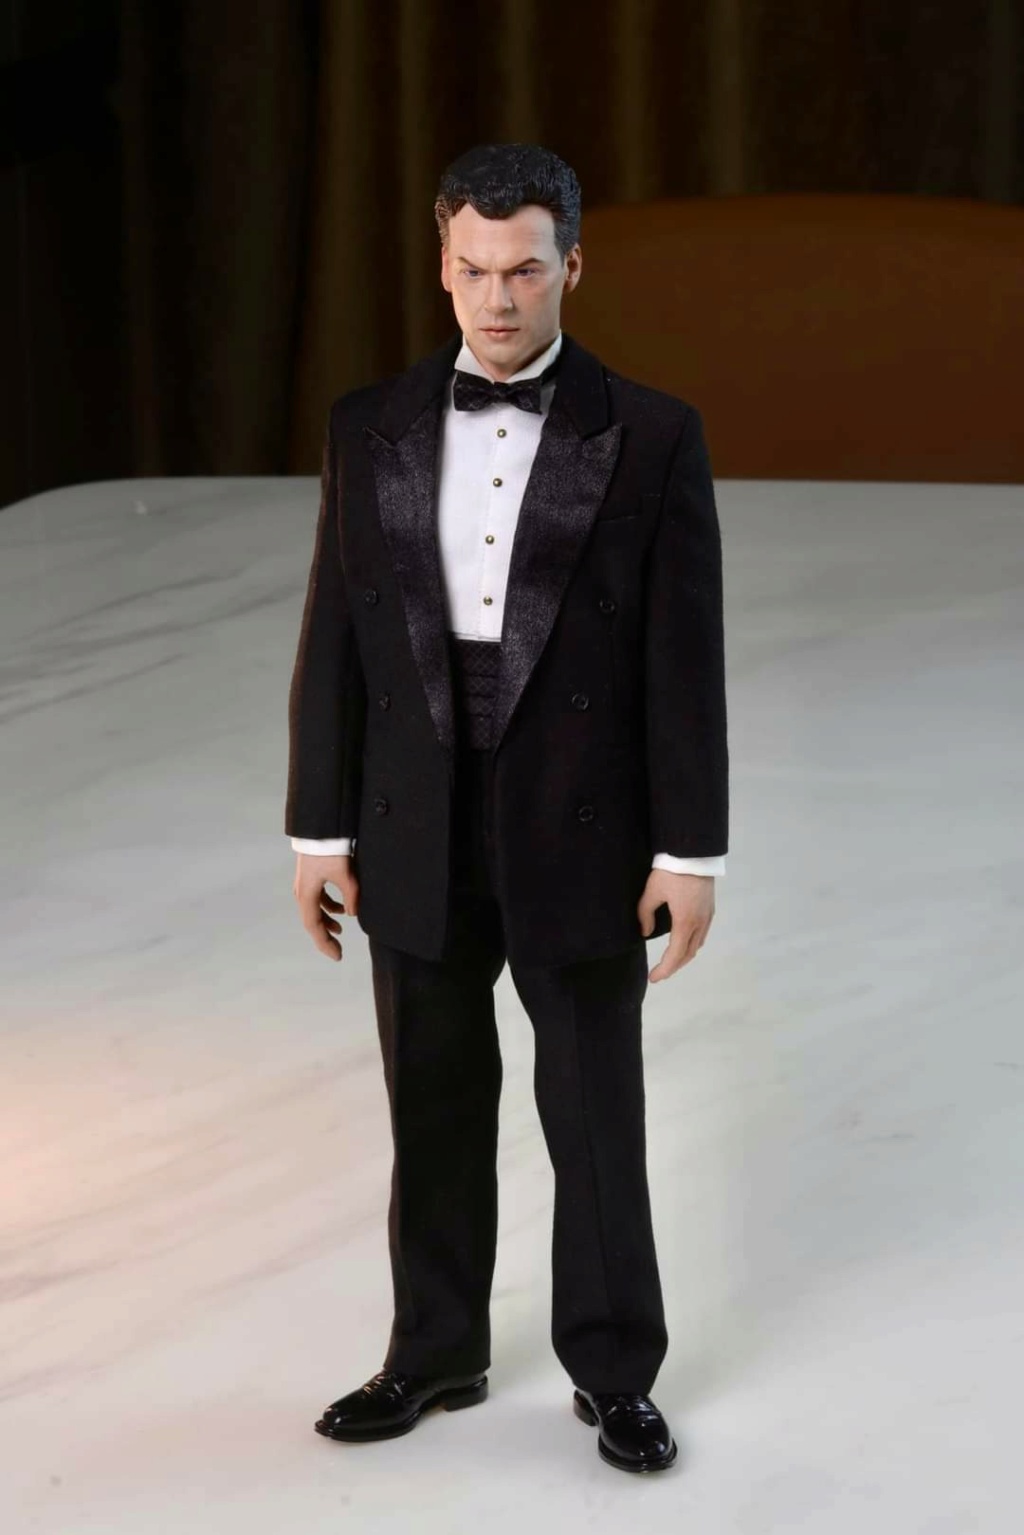 Mr - NEW PRODUCT: Mars Toys: MAT012 1/6 Scale Mr. W figure Img_6116